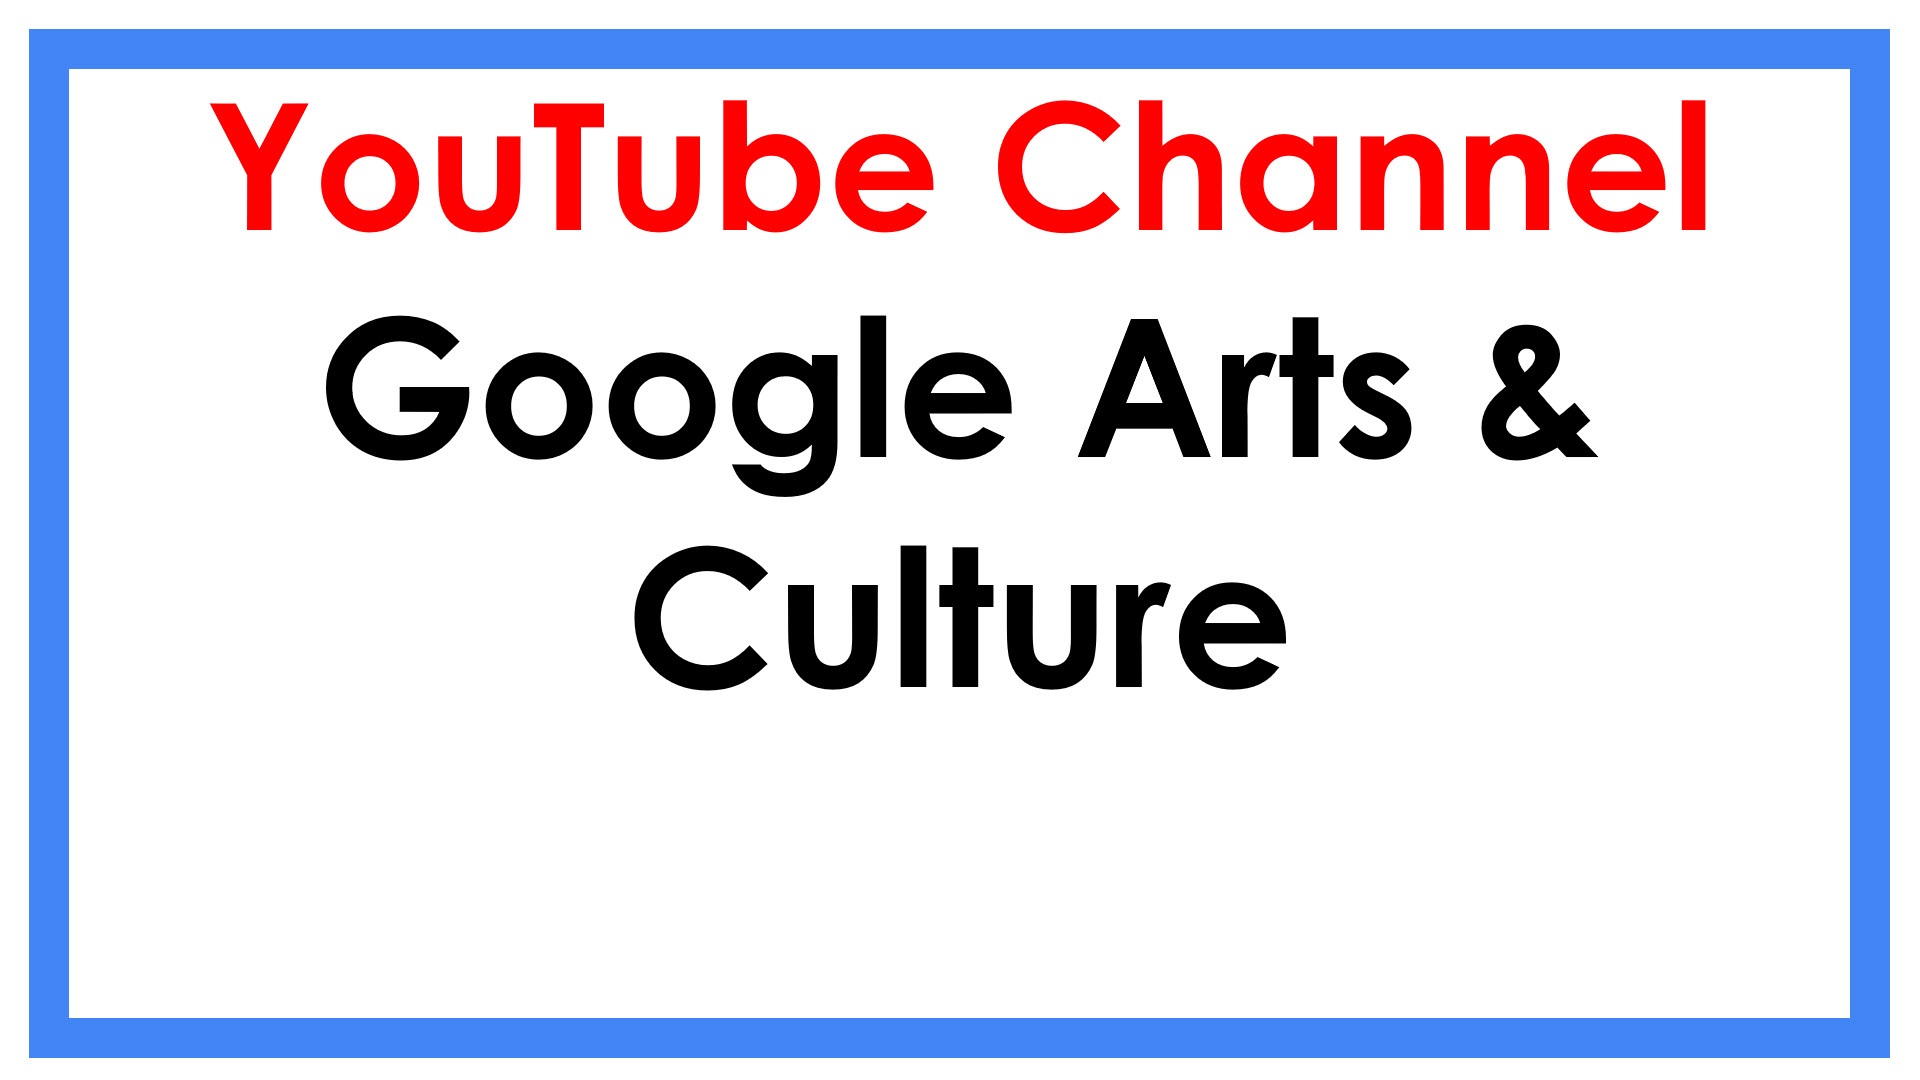 Youtube Channel Google Arts & Culture